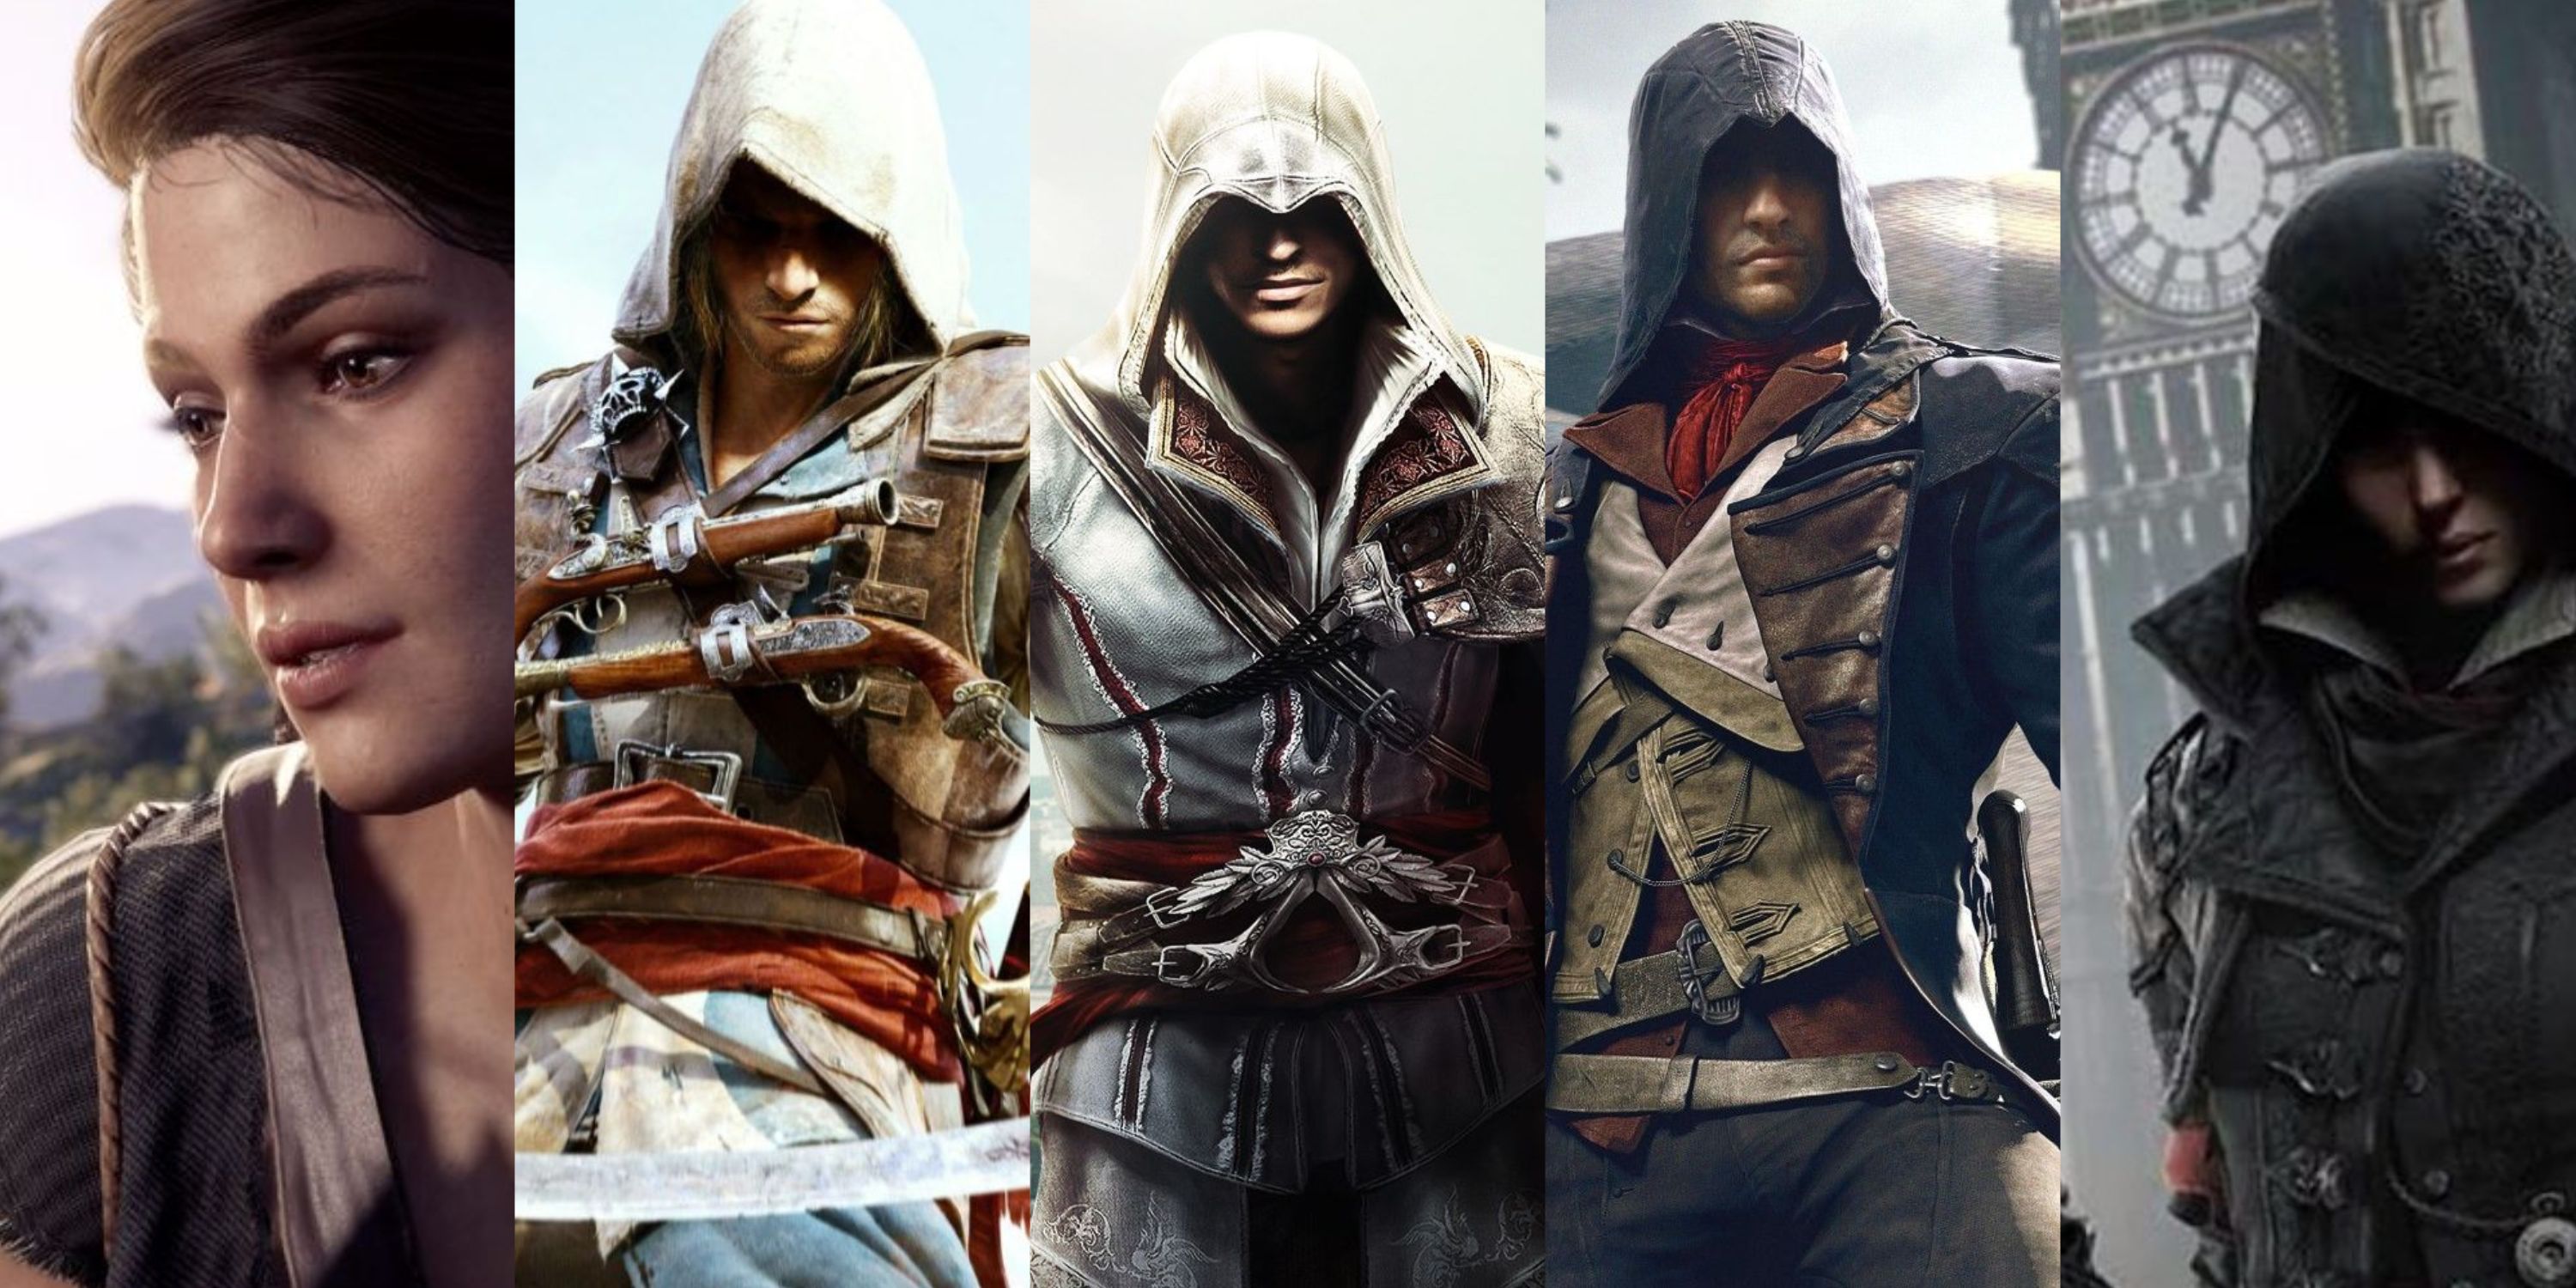 Assassin's Creed First And Last Line Split Image of Protagonists